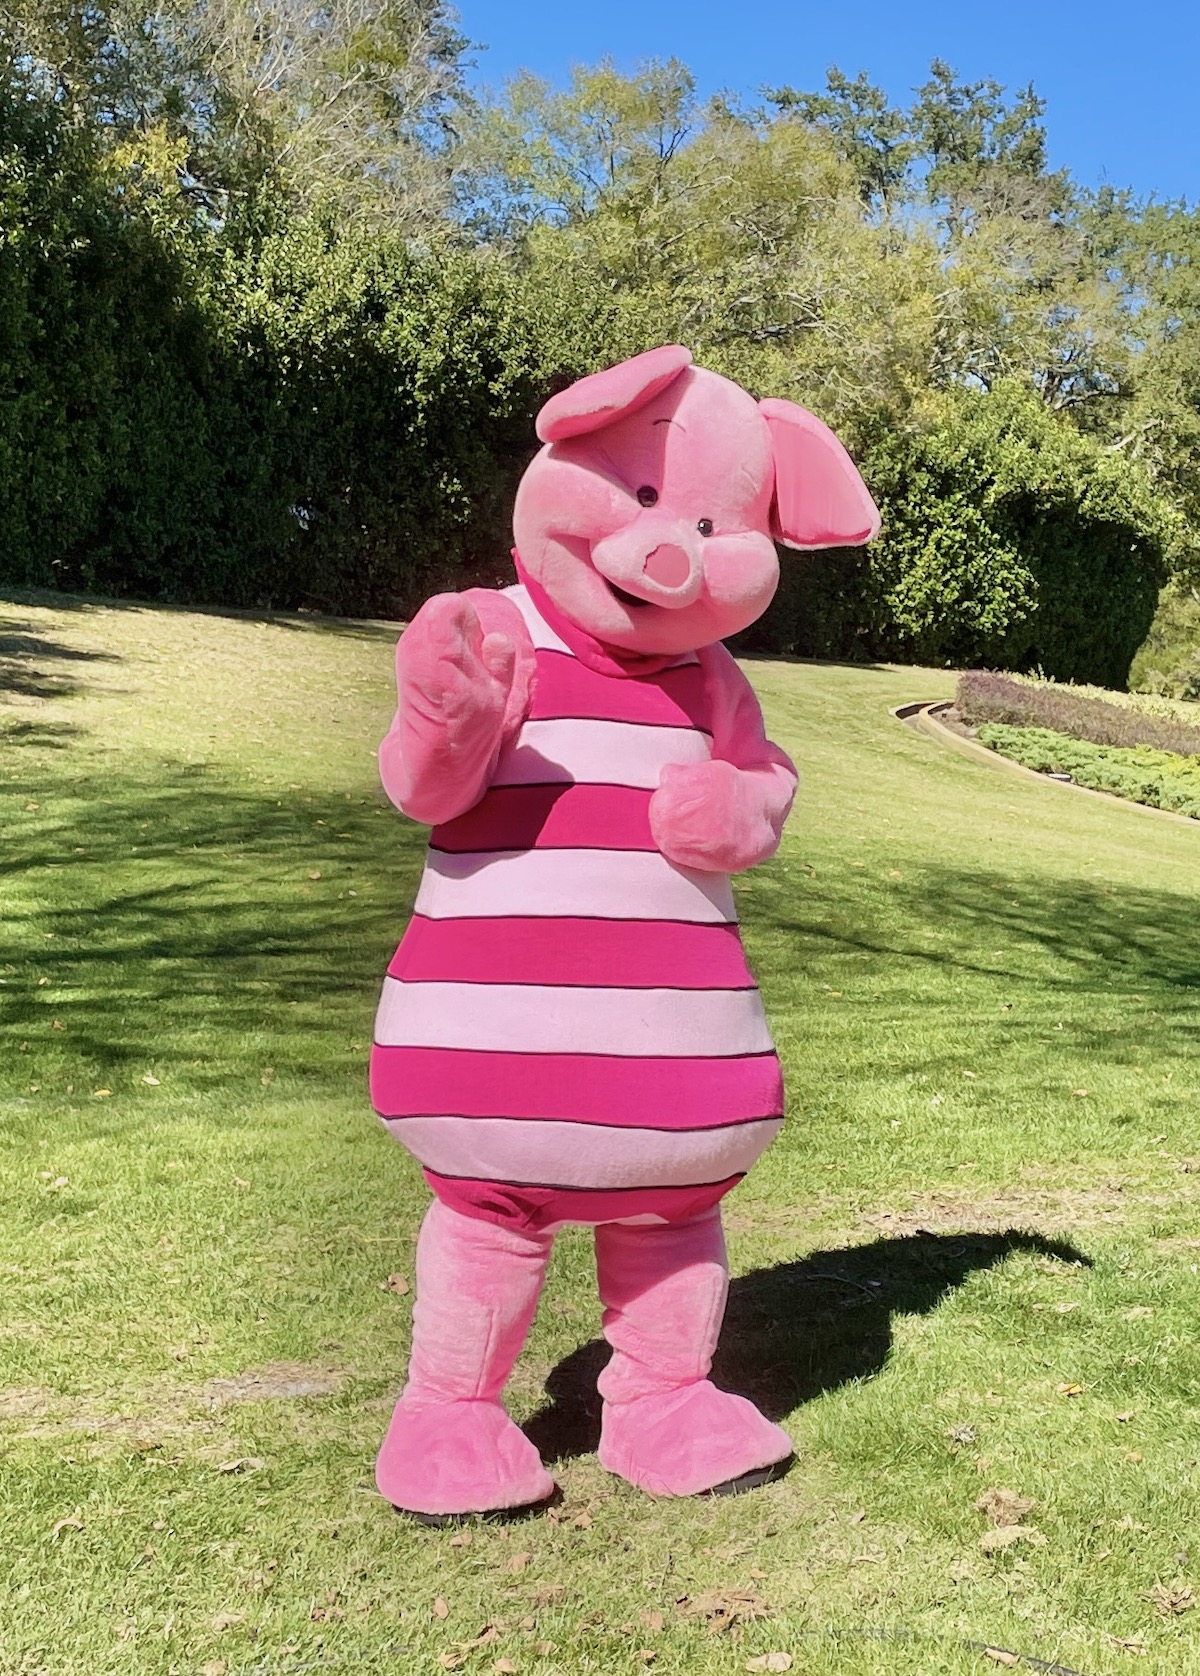 Piglet at Epcot Festival of the Arts 2022.